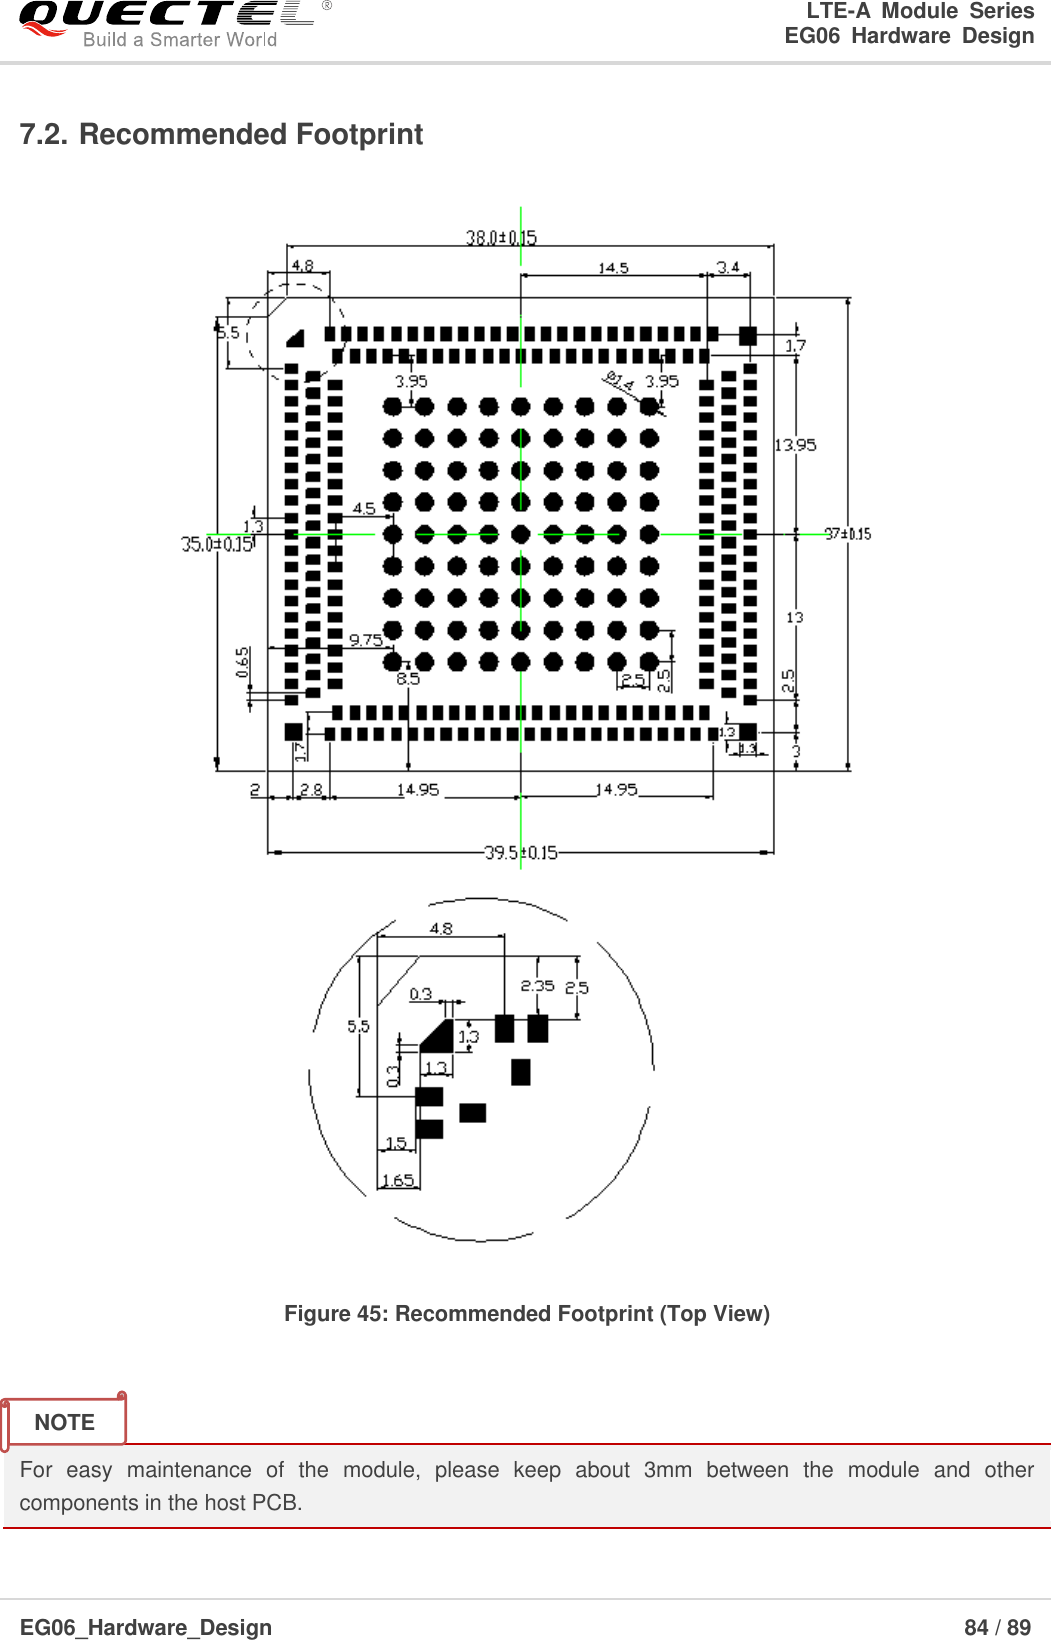 LTE-A  Module  Series                                                  EG06  Hardware  Design  EG06_Hardware_Design                                                               84 / 89    7.2. Recommended Footprint   Figure 45: Recommended Footprint (Top View)   For  easy  maintenance  of  the  module,  please  keep  about  3mm  between  the  module  and  other components in the host PCB. NOTE 